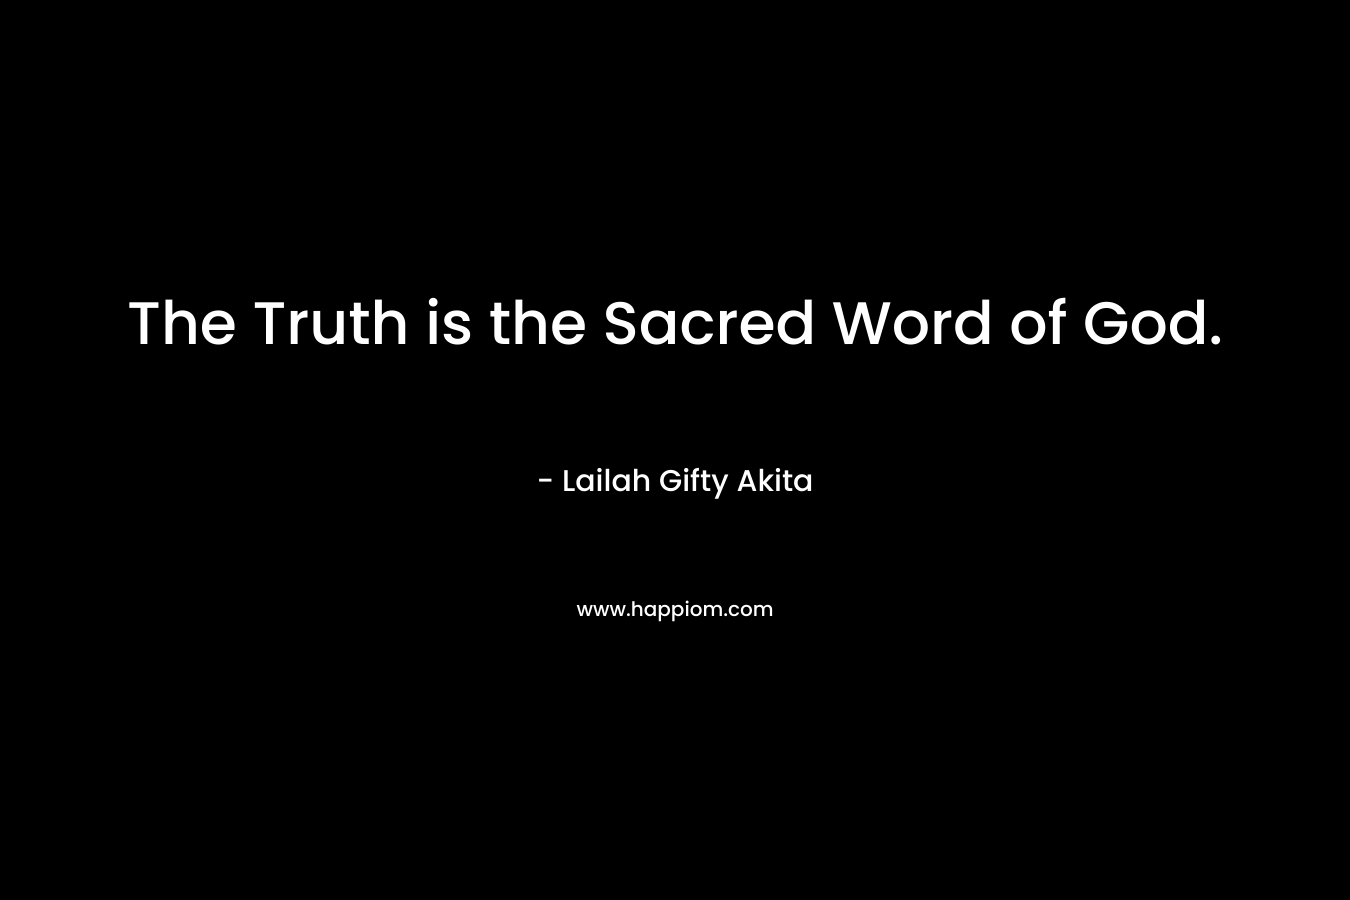 The Truth is the Sacred Word of God.